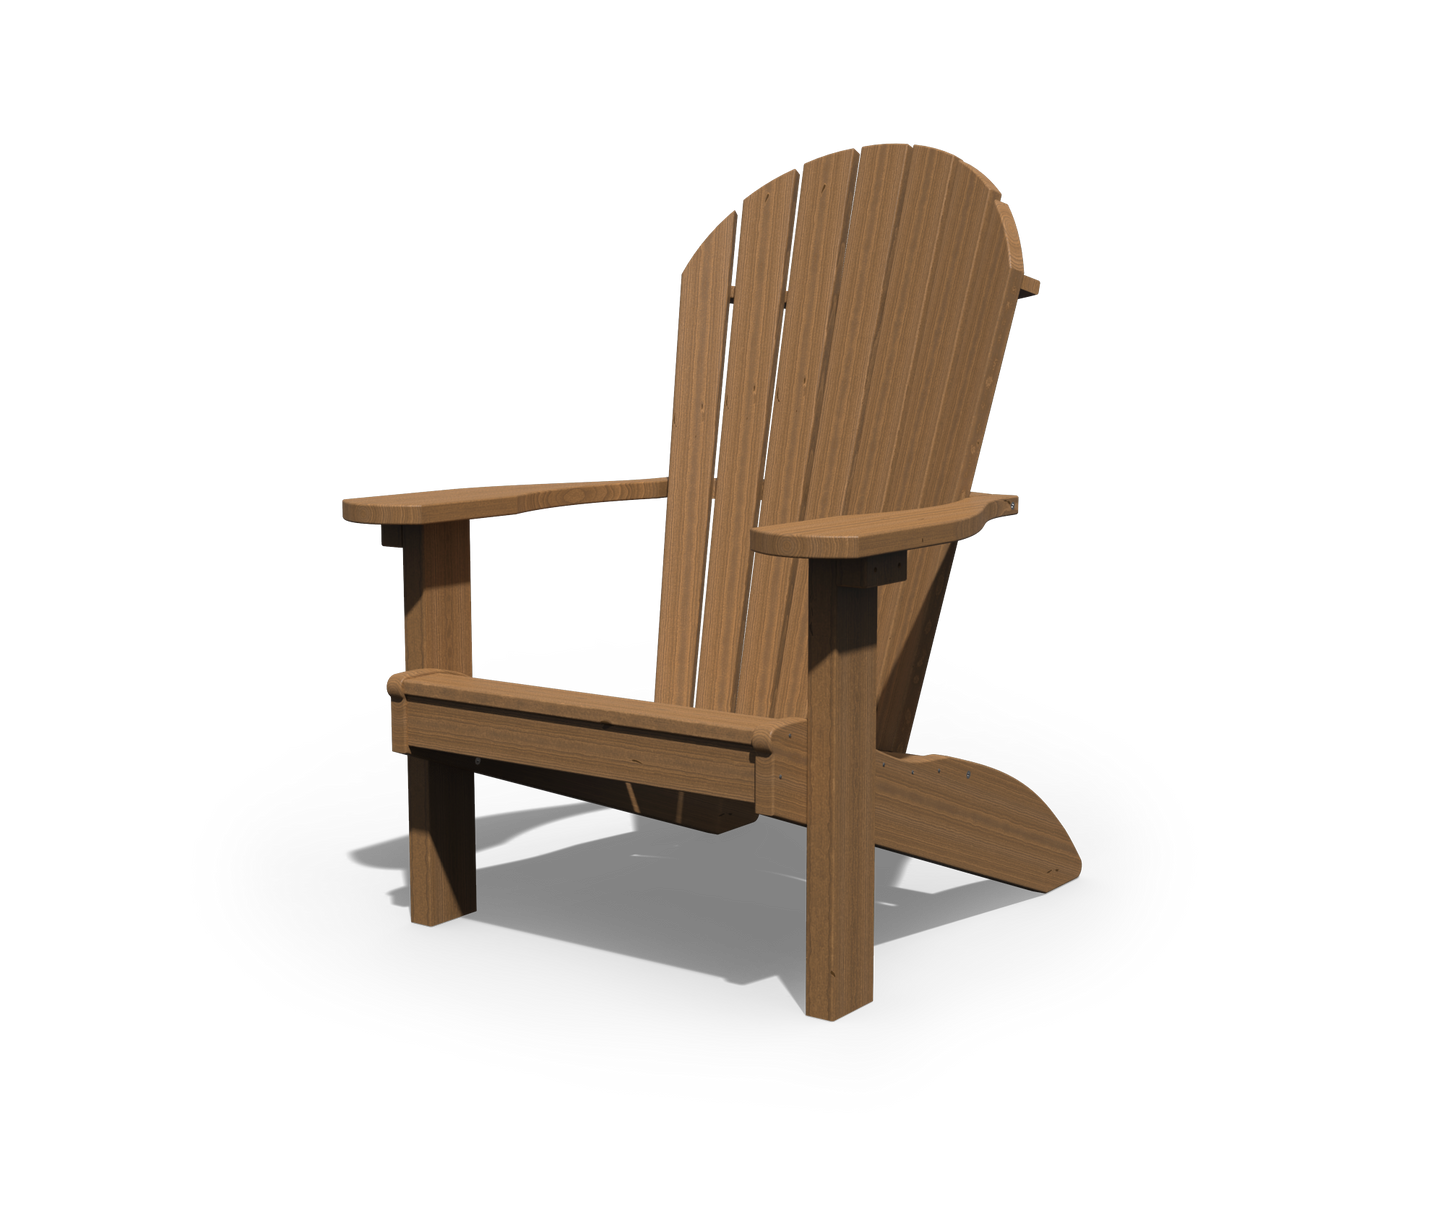 Patiova Amish Crafted Pressure Treated Pine Adirondack Chair - LEAD TIME TO SHIP 3 WEEKS